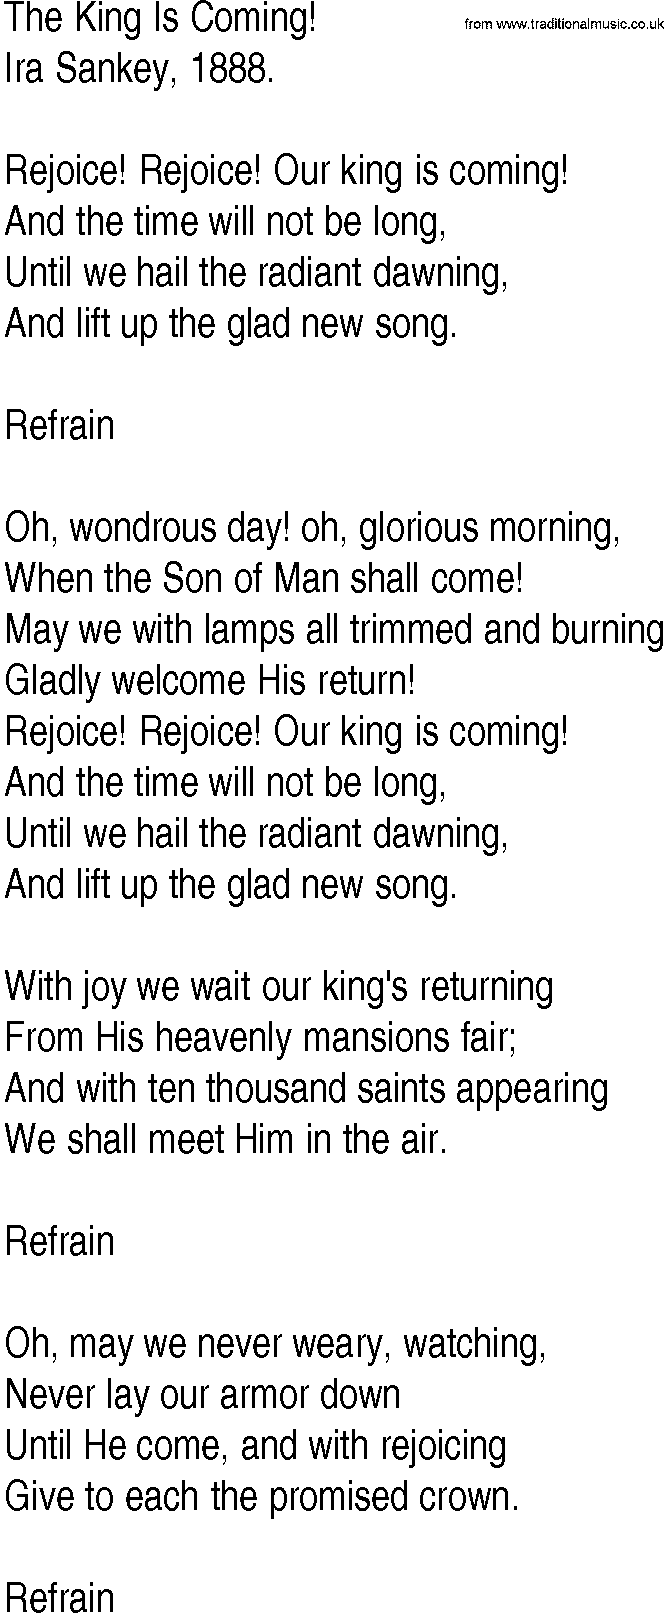 Hymn and Gospel Song: The King Is Coming! by Ira Sankey lyrics